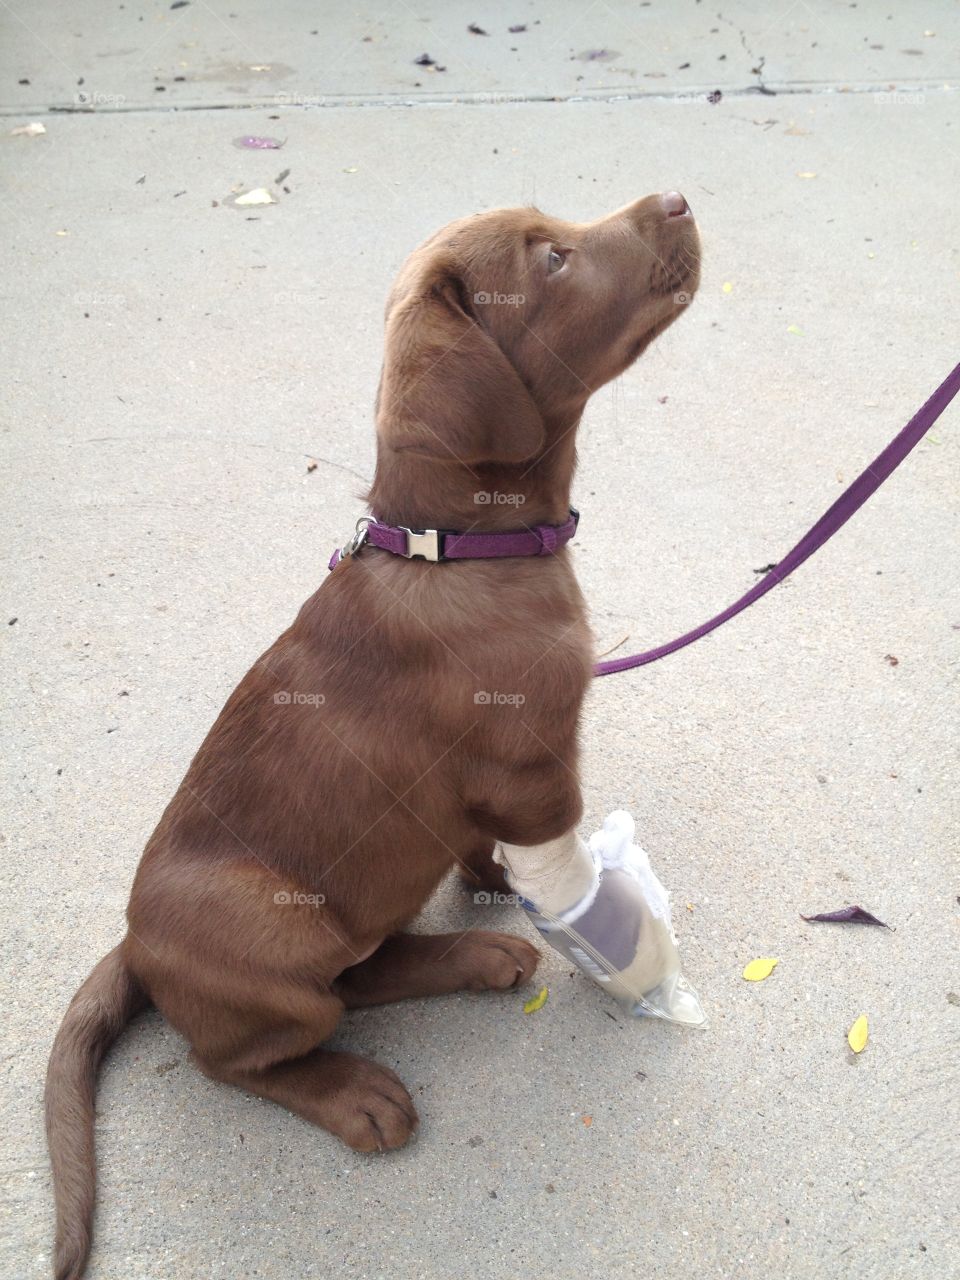 It could be worse, you could be a puppy with a broken foot